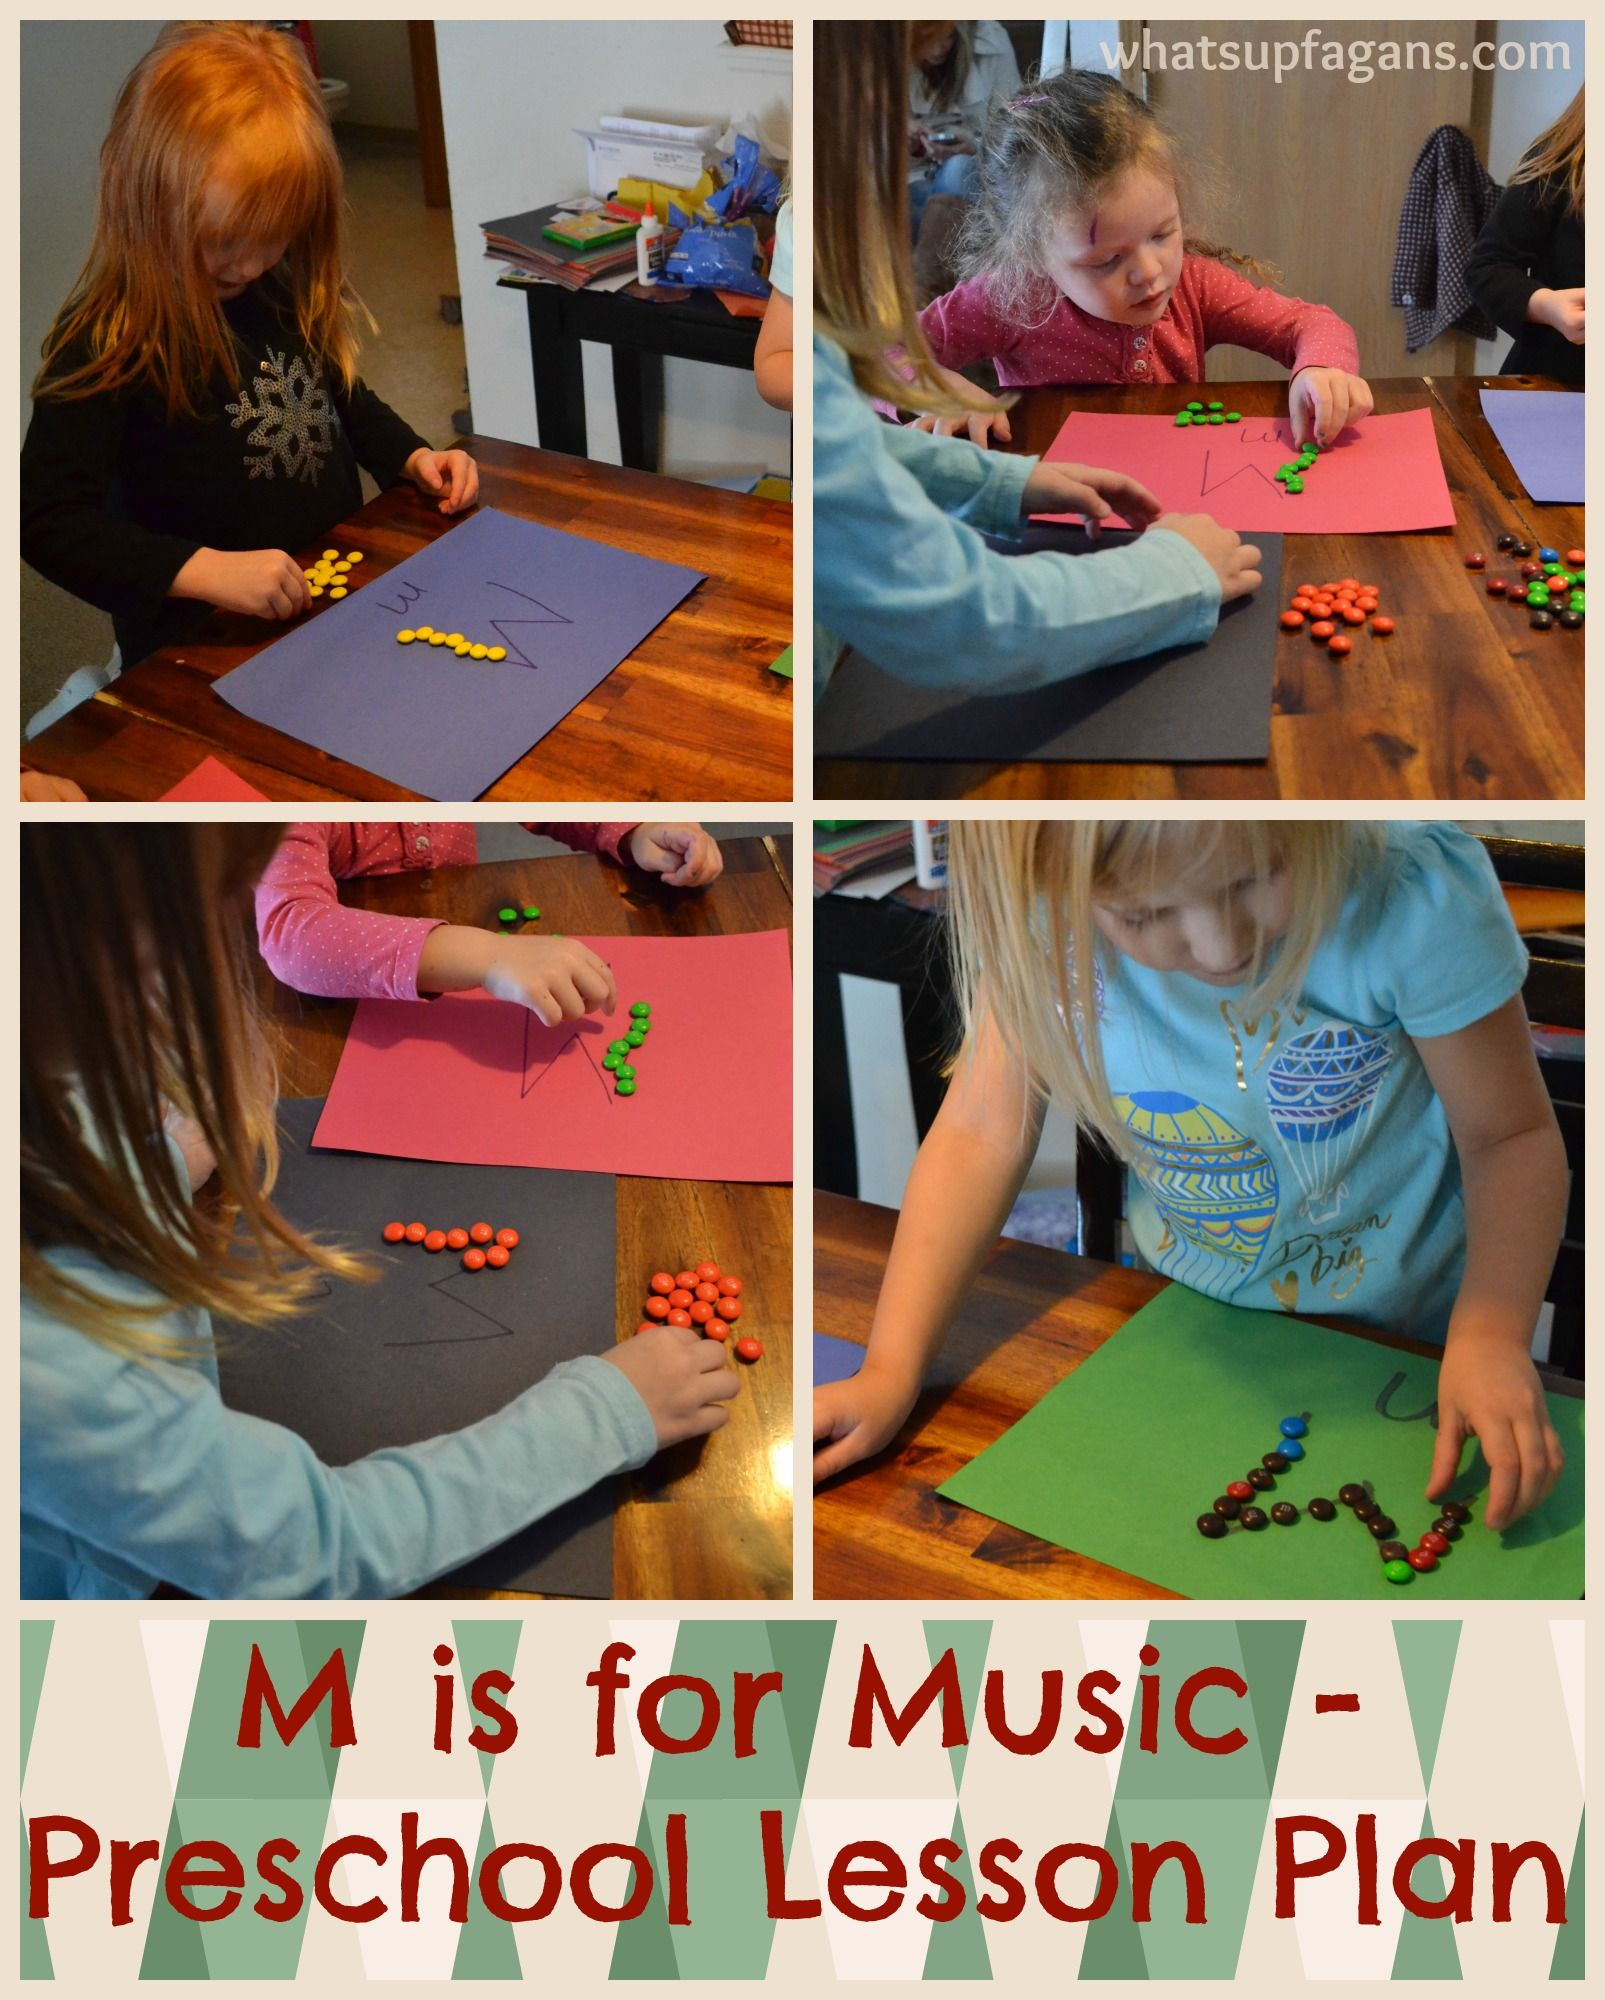 Letter M Activities For Preschool: M Is For Music Lesson